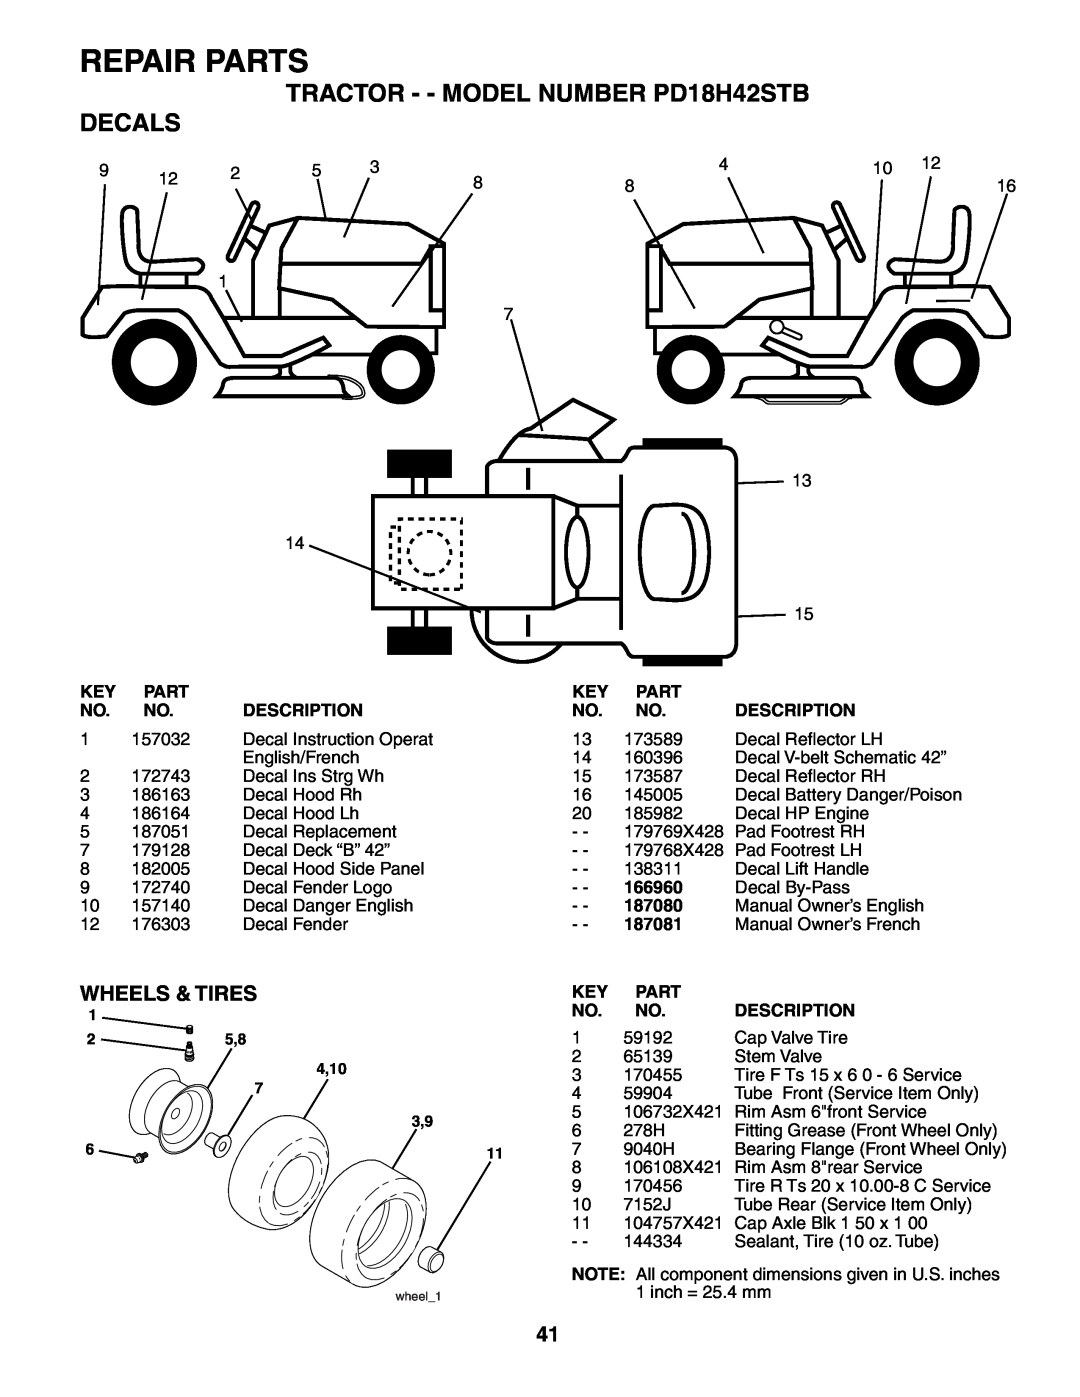 Poulan owner manual TRACTOR - - MODEL NUMBER PD18H42STB DECALS, Wheels & Tires, Repair Parts 